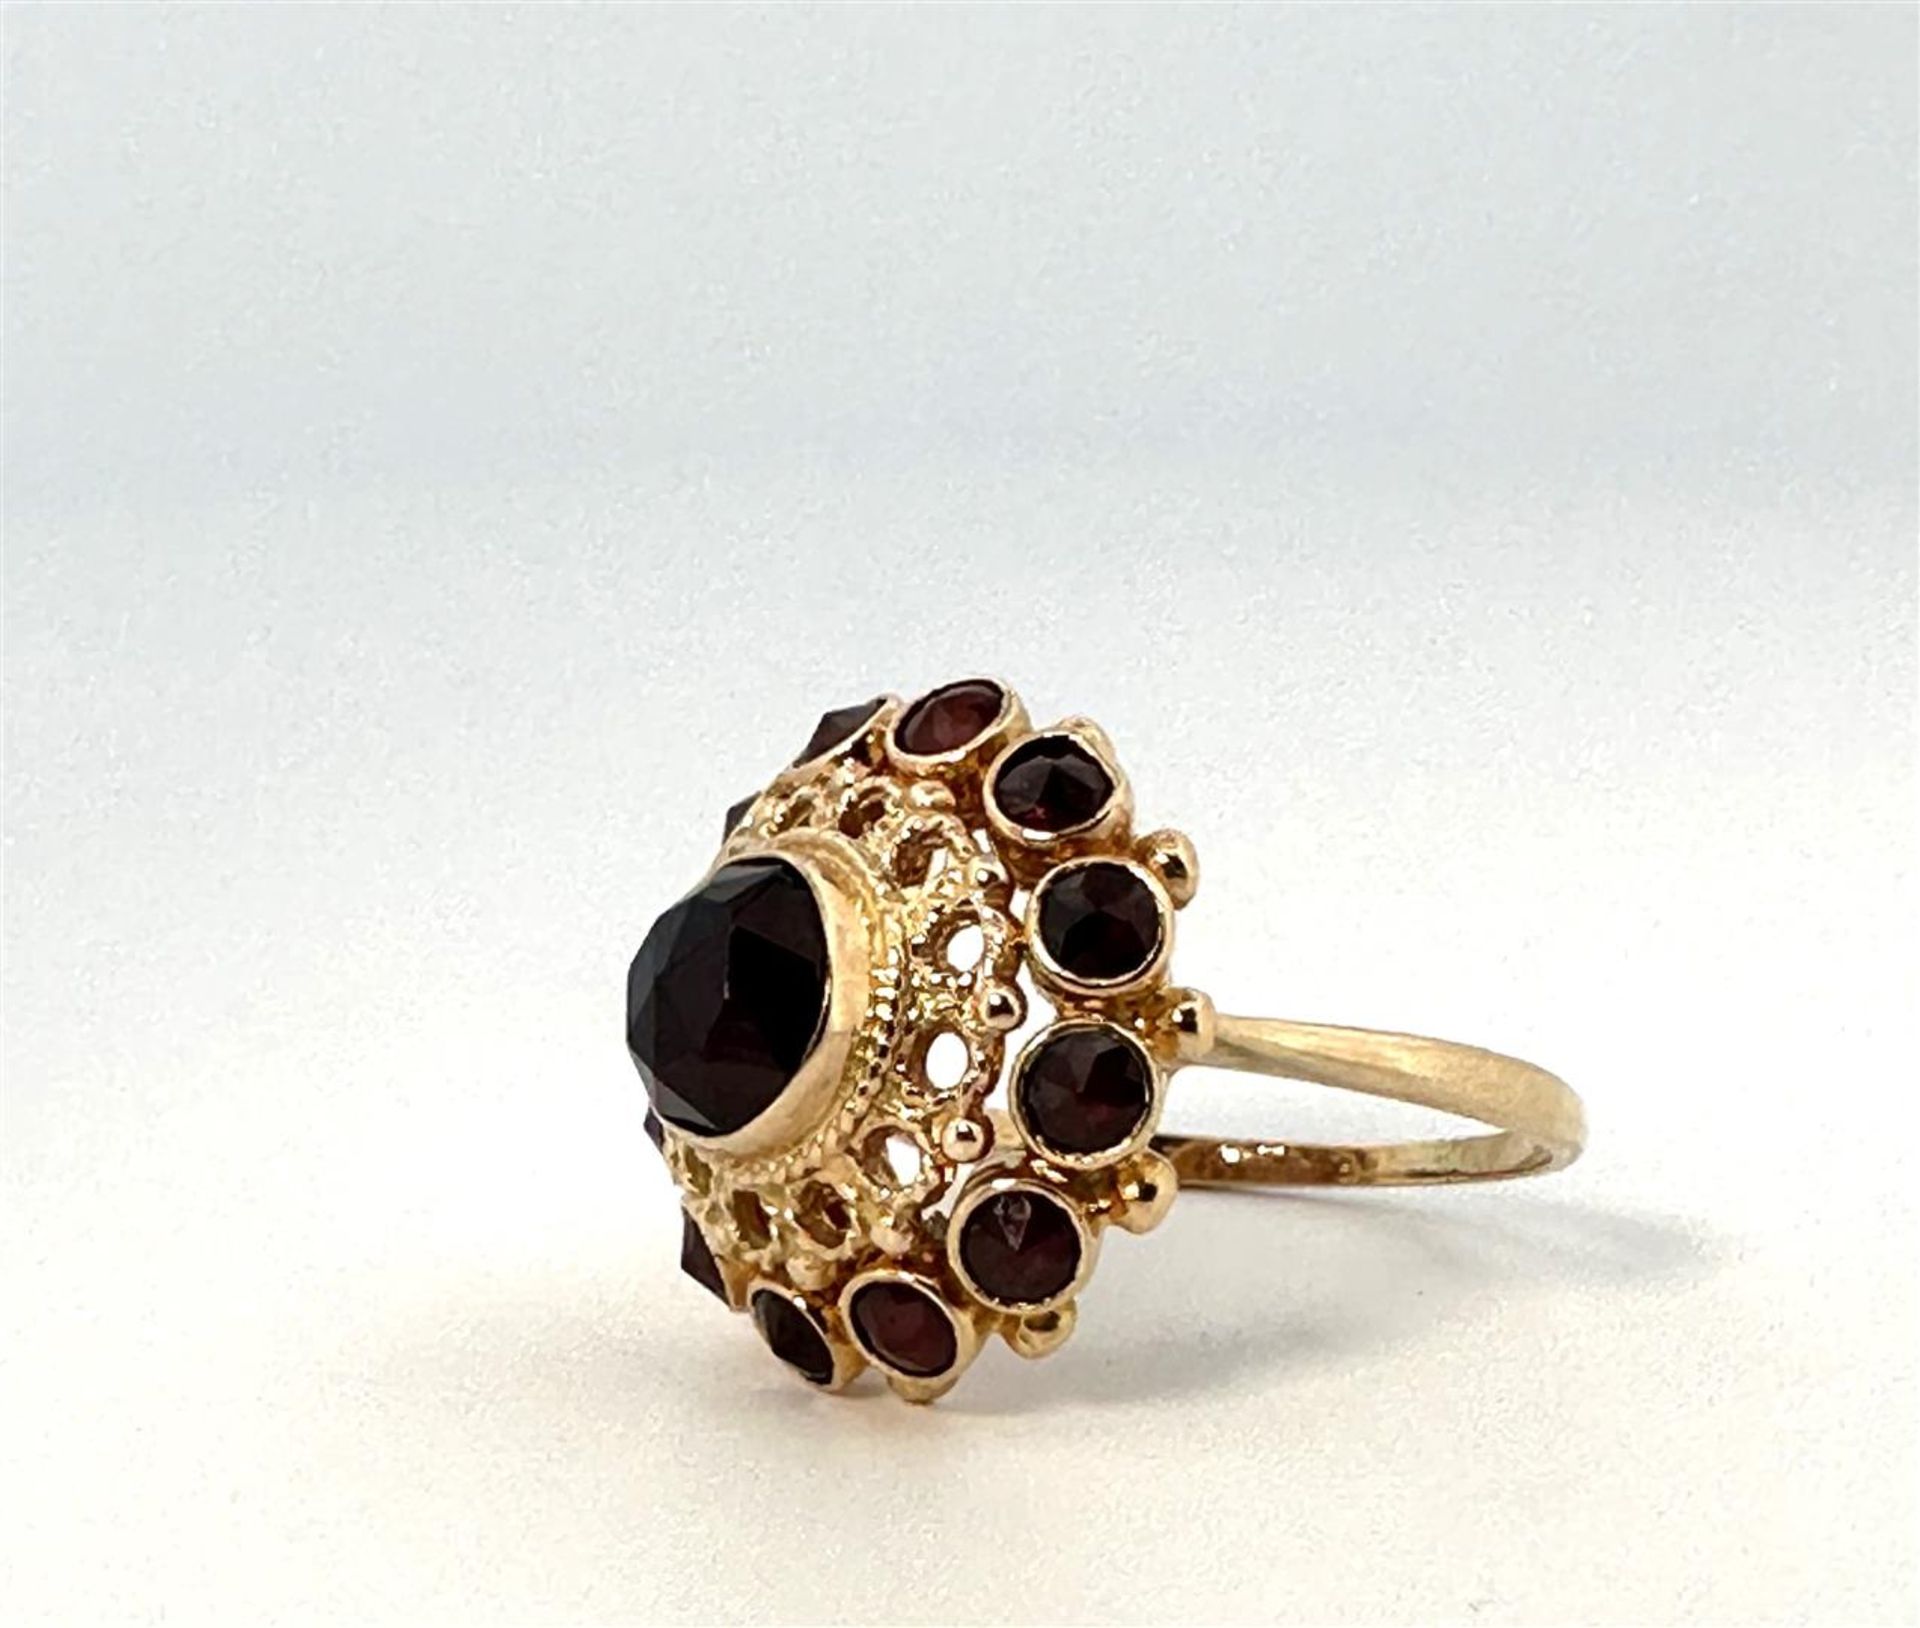 14kt yellow gold rosette ring set with garnet.
The ring is set with 1 central stone, rose cut of app